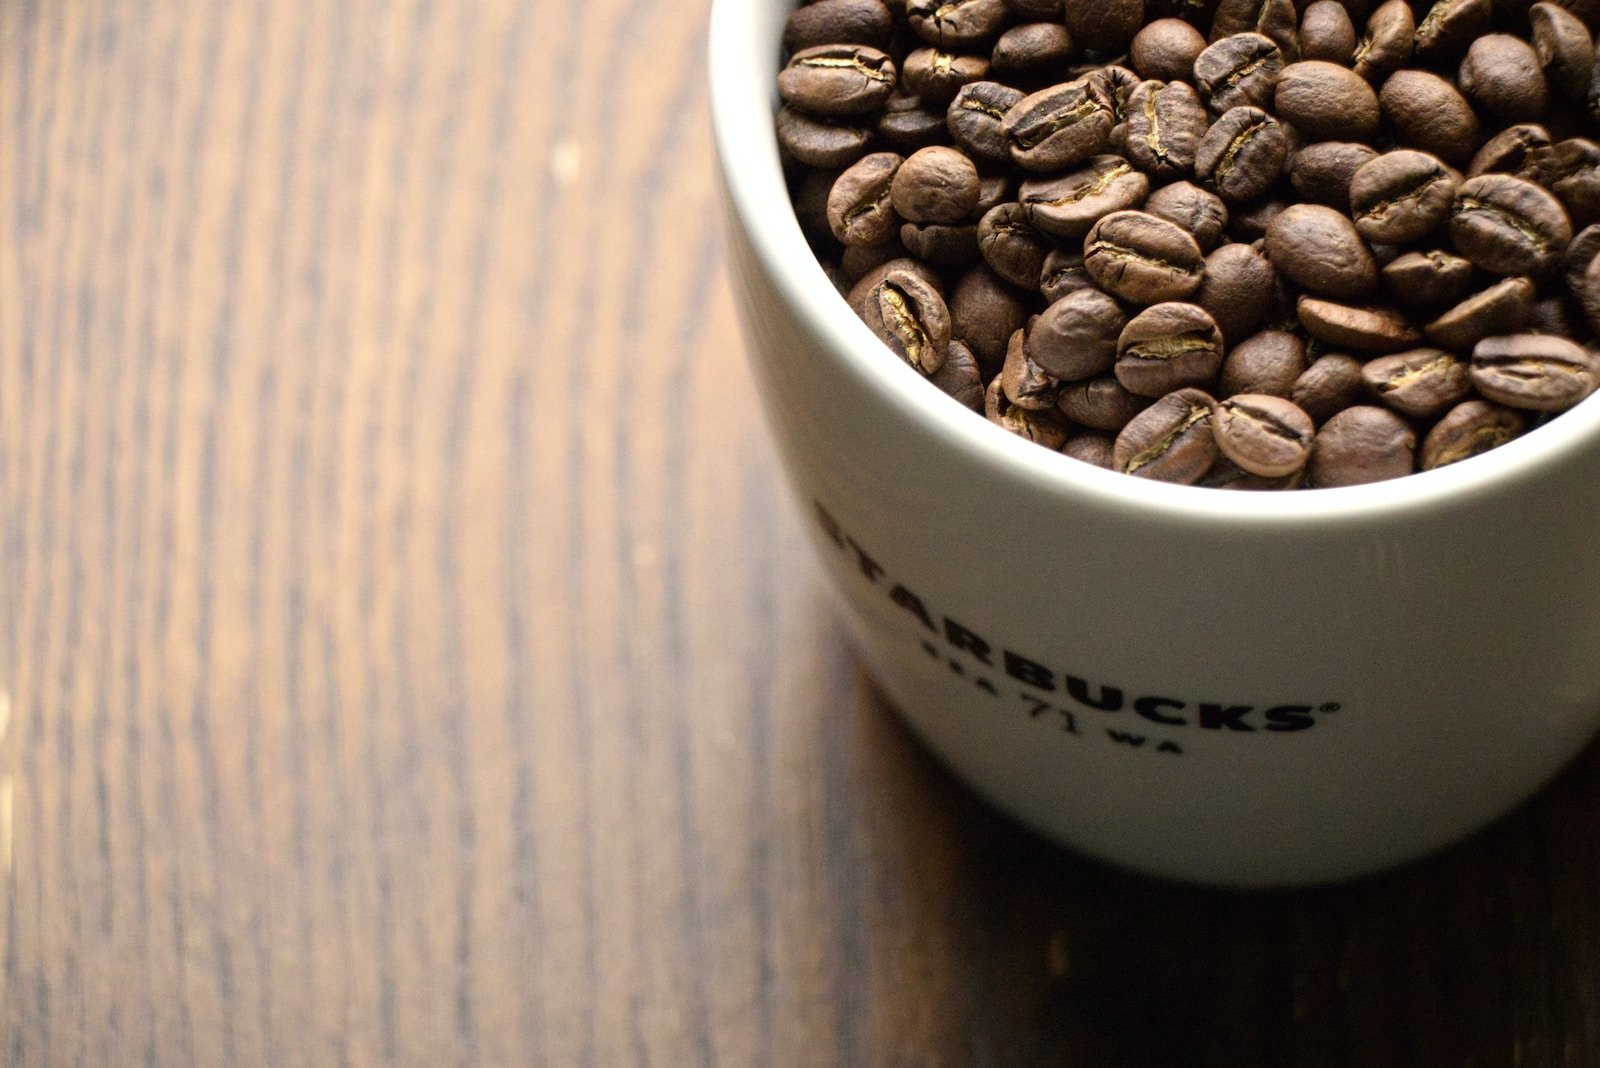 Top 13 Best Whole Bean Coffee Choices on Amazon